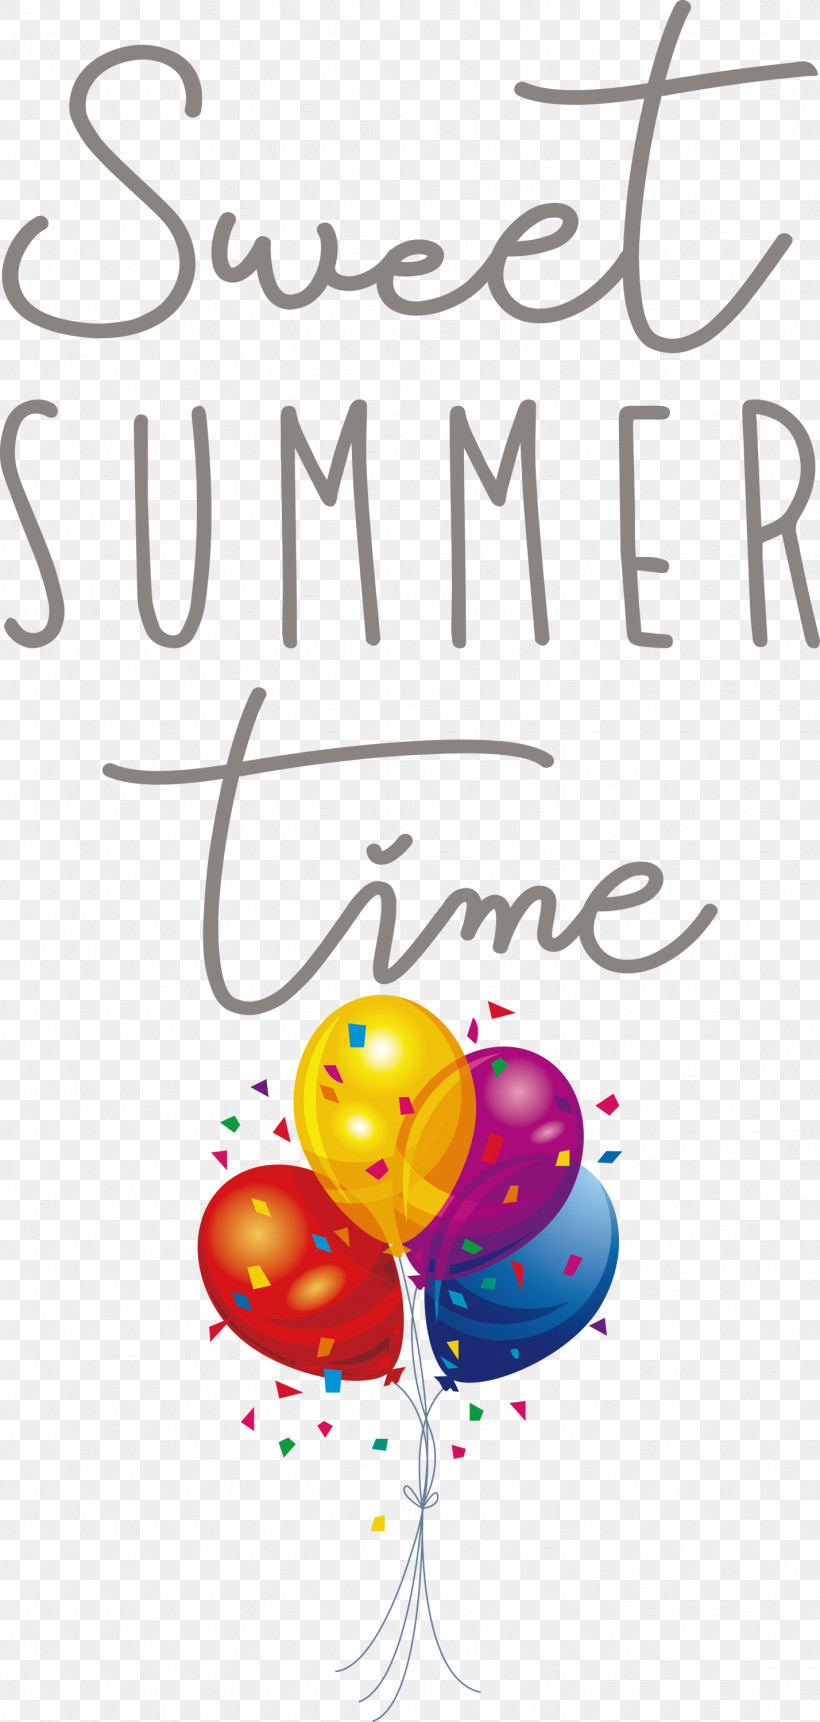 Sweet Summer Time Summer, PNG, 1428x2999px, Summer, Balloon, Flower, Happiness, Line Download Free